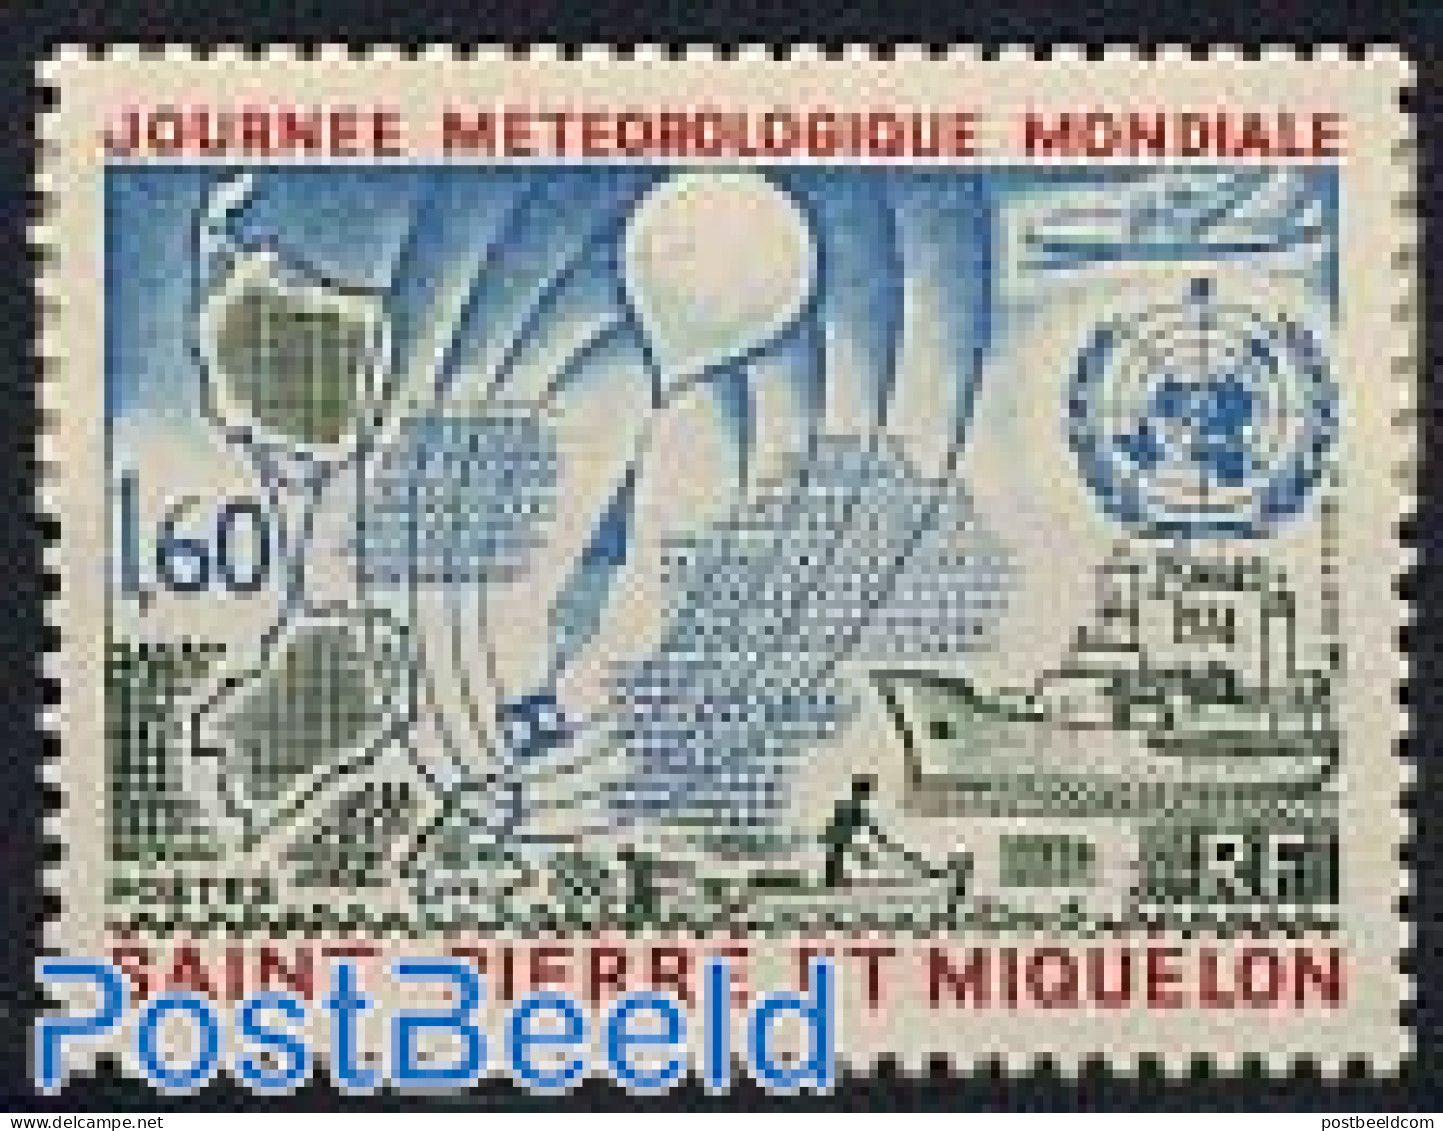 Saint Pierre And Miquelon 1974 Meteorology Day 1v, Mint NH, Science - Transport - Meteorology - Aircraft & Aviation - .. - Climate & Meteorology